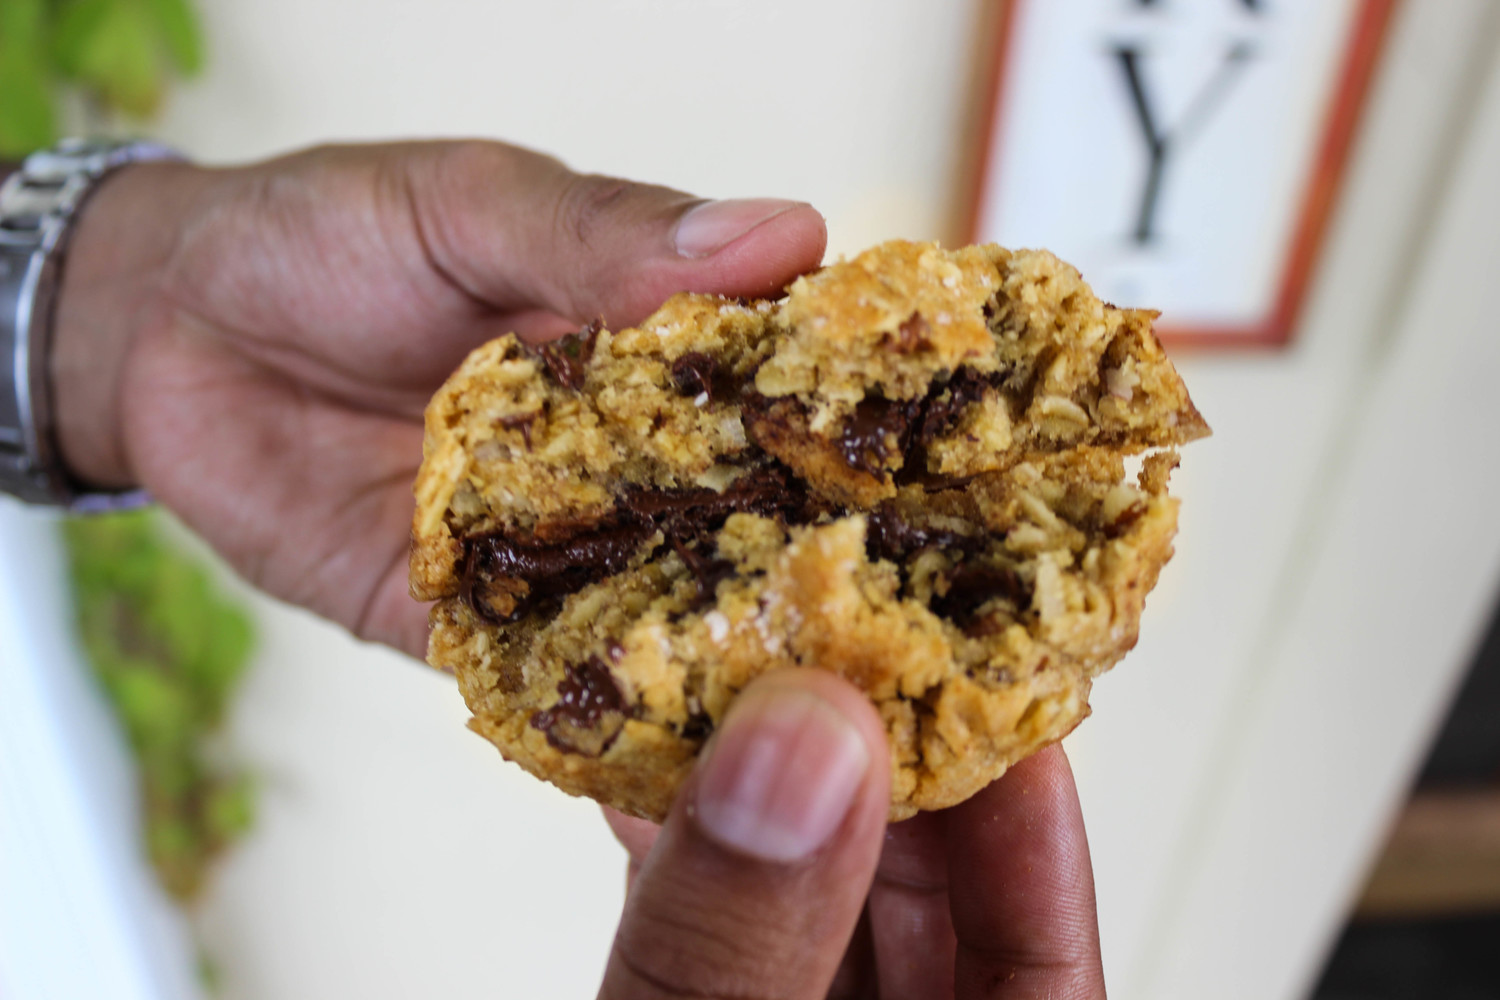 Chunky Chocolate Pecan cookie from Good Butter Bakery